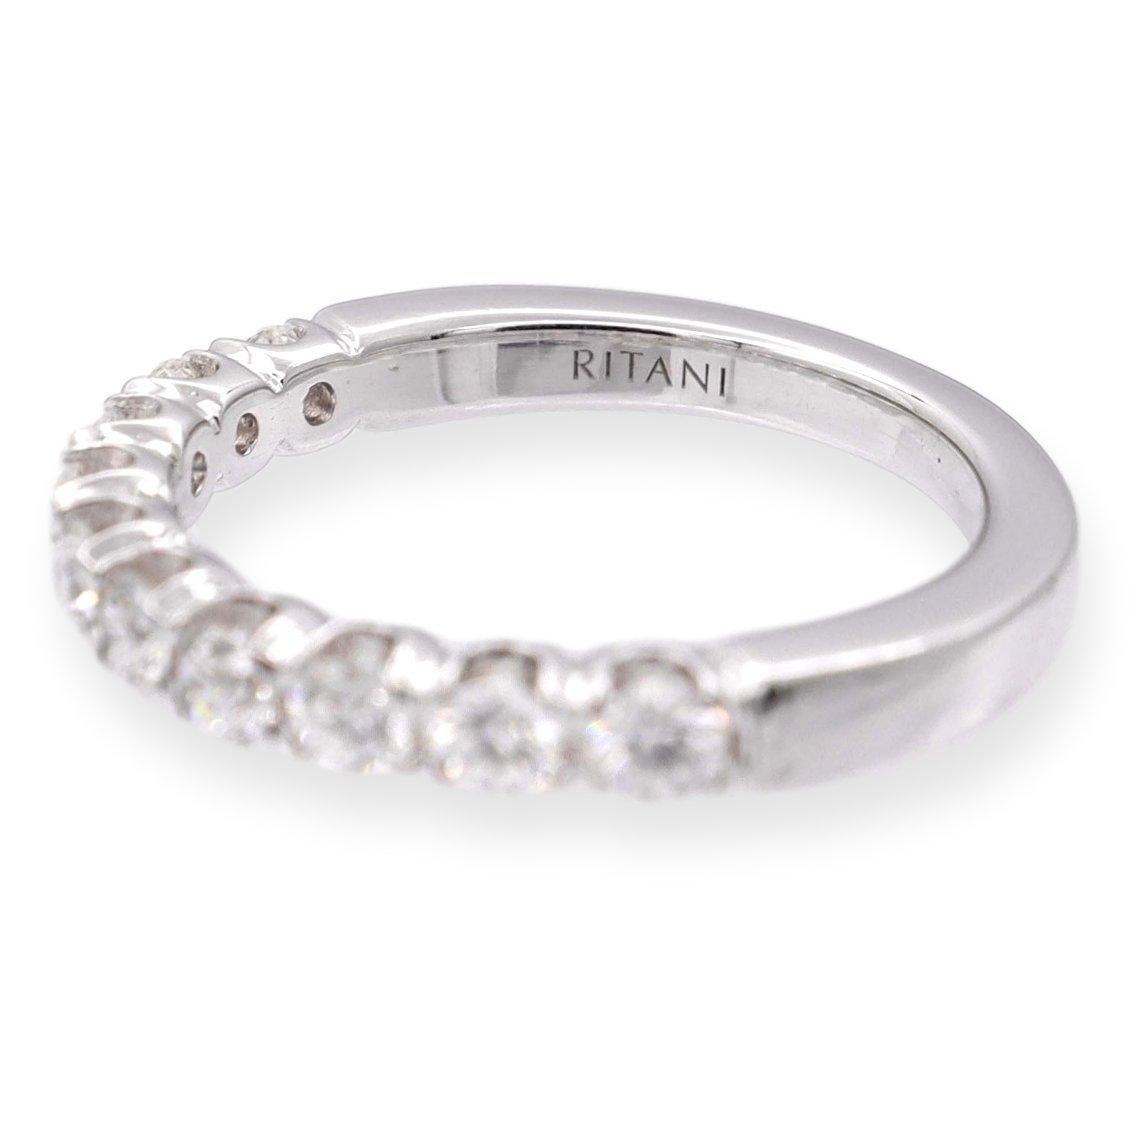 Ritani wedding band ring from the Masterwork collection finely crafted in platinum featuring 10 round brilliant cut diamonds weighing 0.66 carats total weight approximately G-H color, VS2 clarity set in shared prongs with 